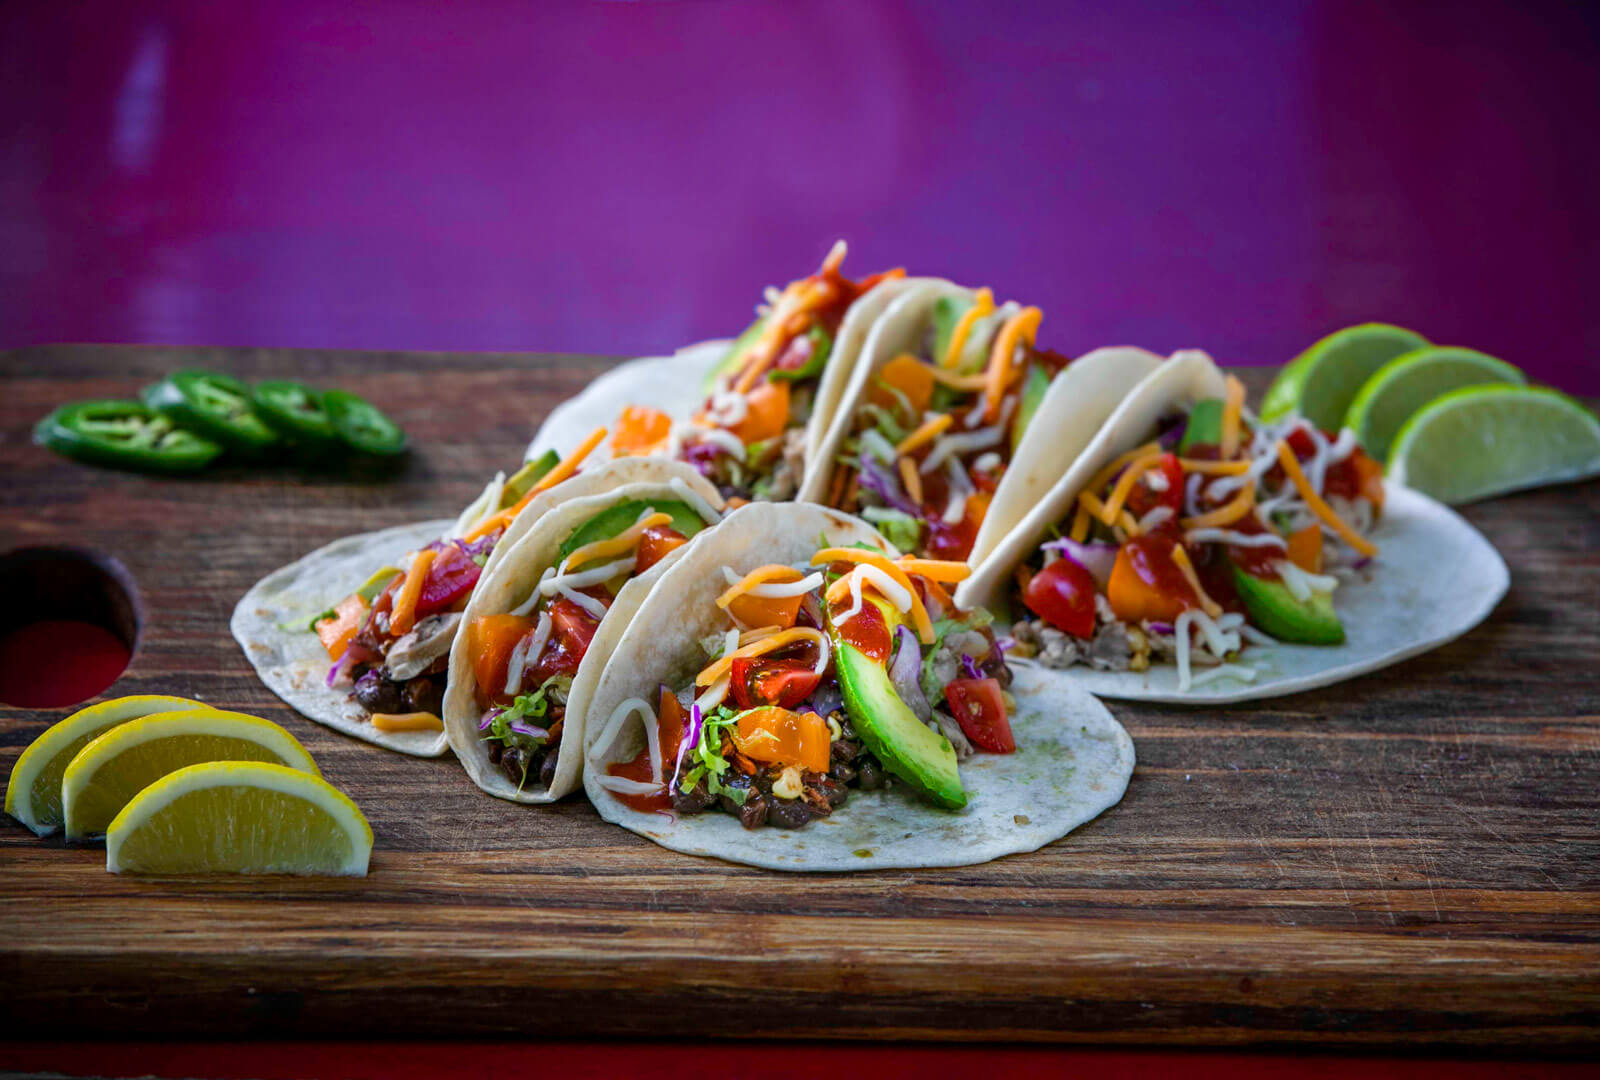 6 flavorful MegaMex tacos on a plate with a bright purple background